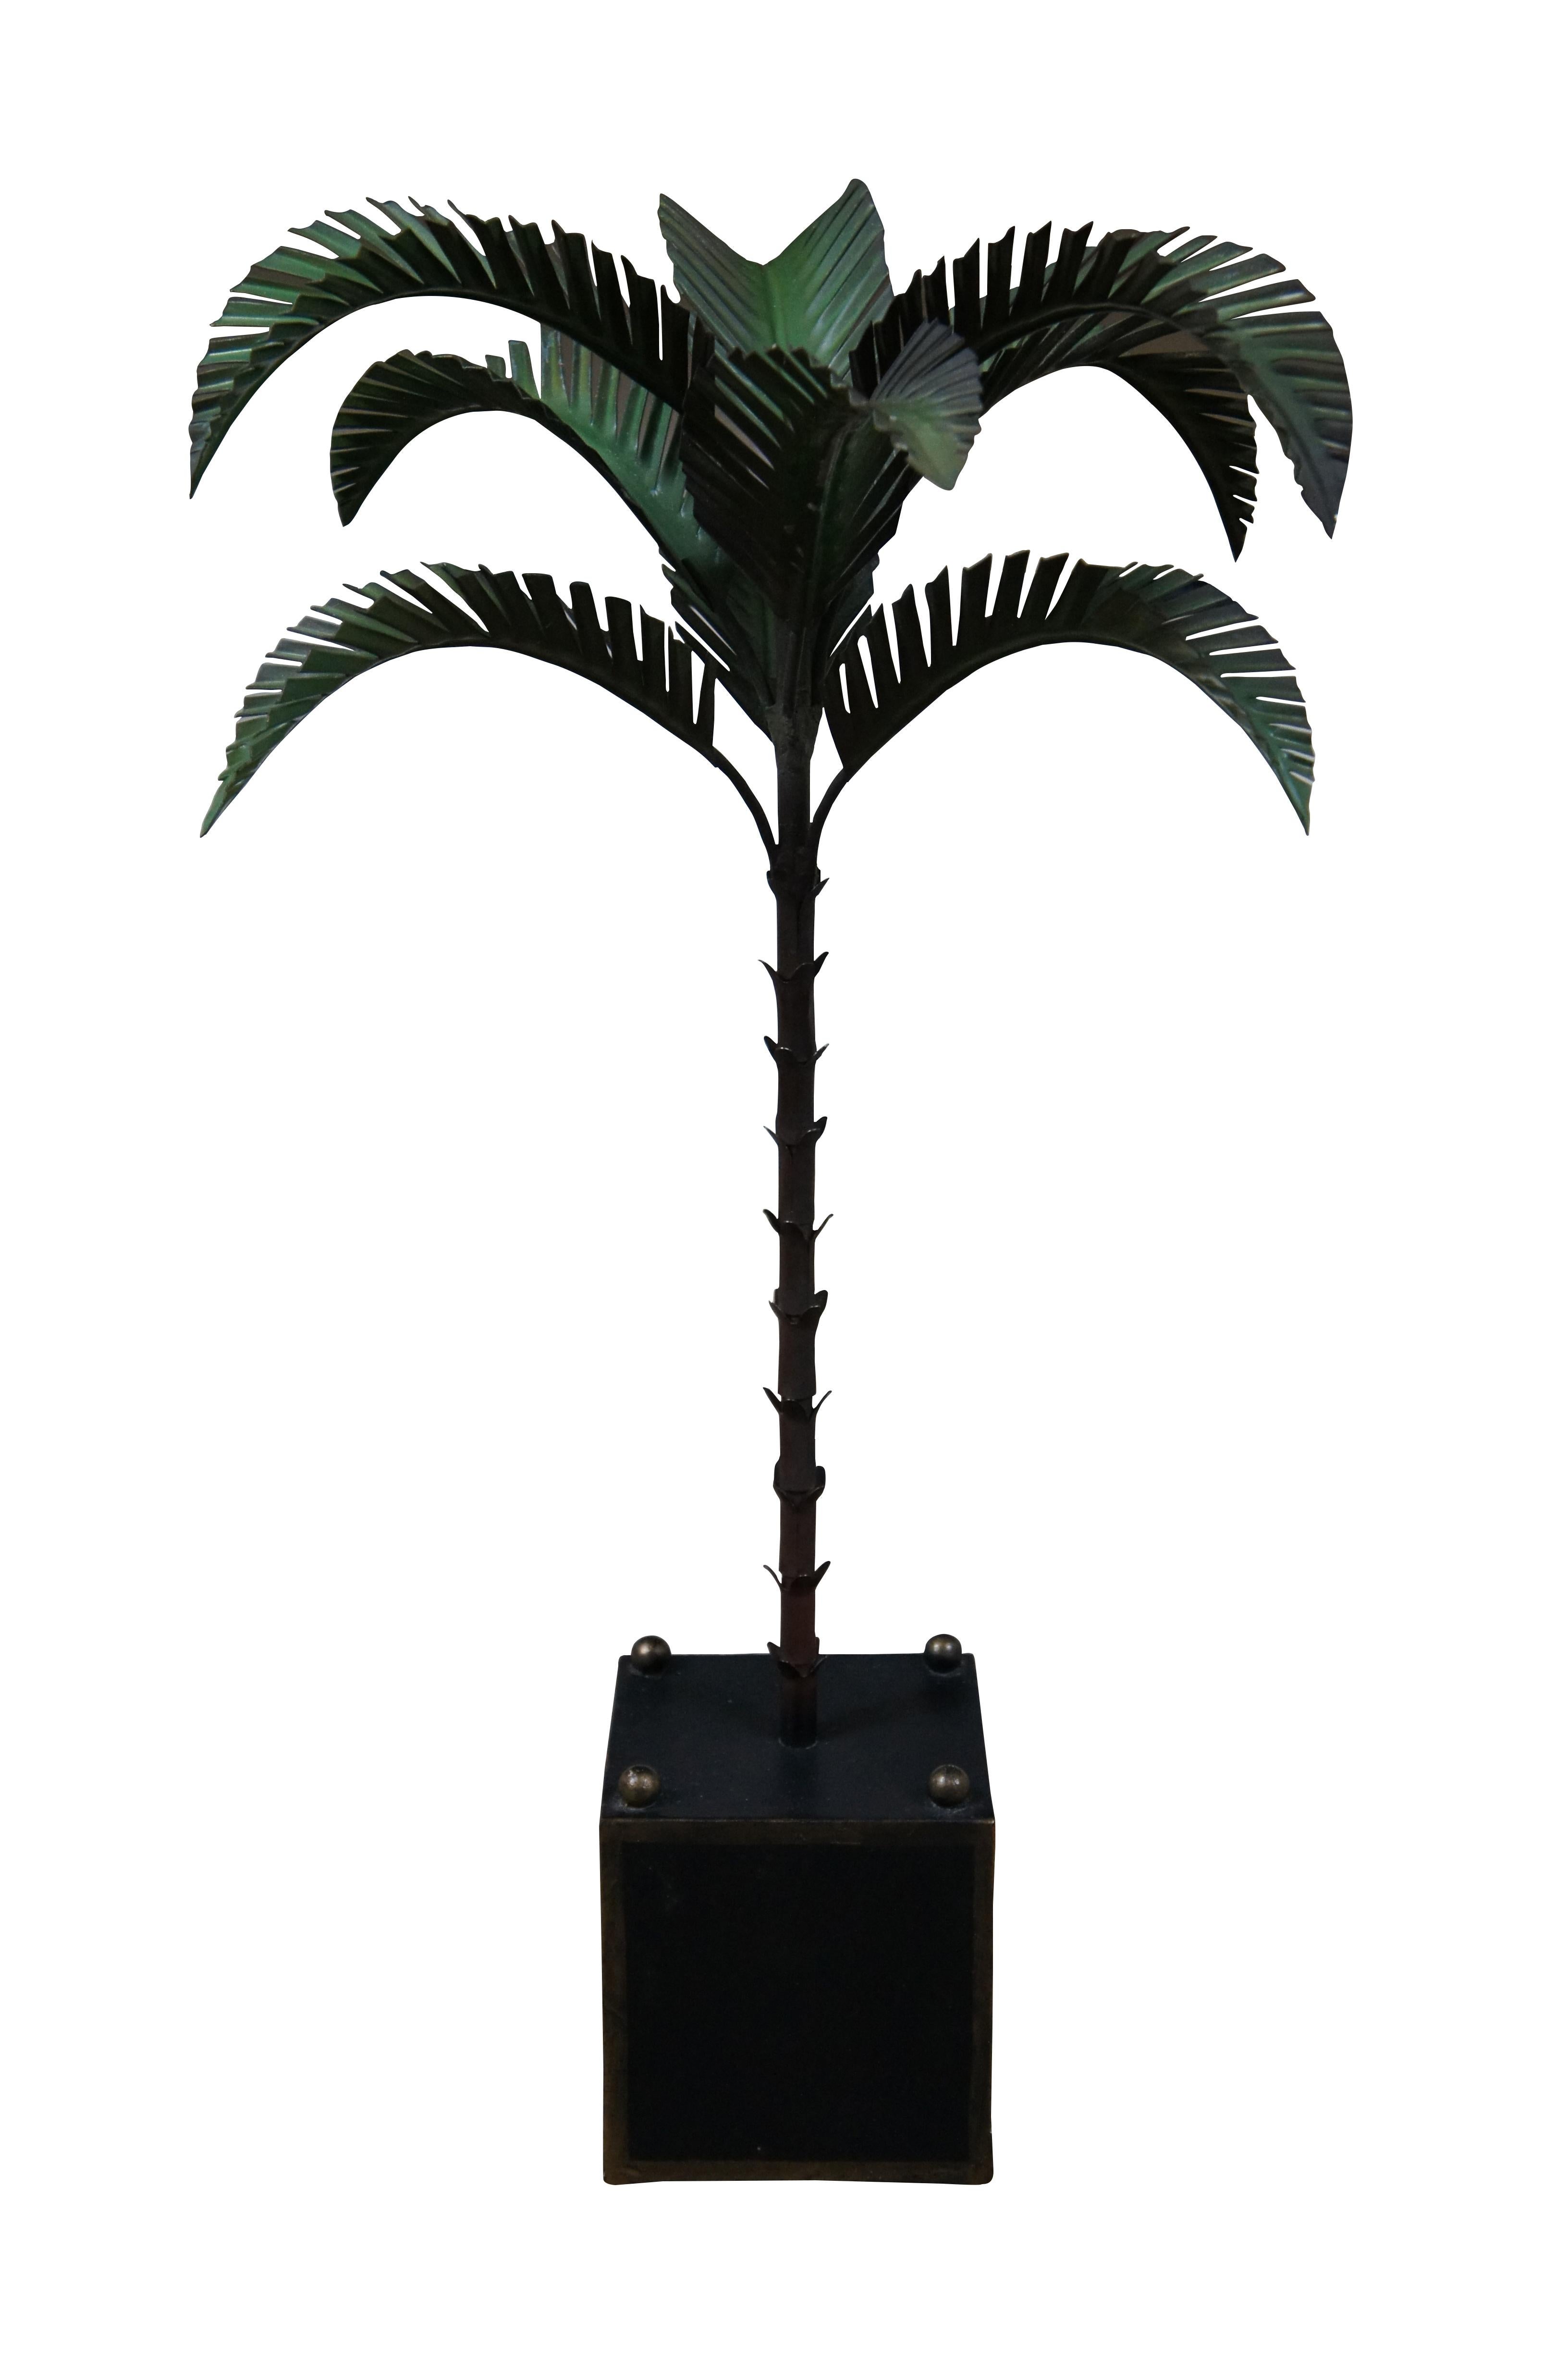 Mid century 1960’s Italian toleware painted metal lamp or sculpture in the shape of a palm tree perched on a black and gold planter base with gold ball feet and finials. Numbered 1-2038, made in Italy. This was originally a lamp, but was converted